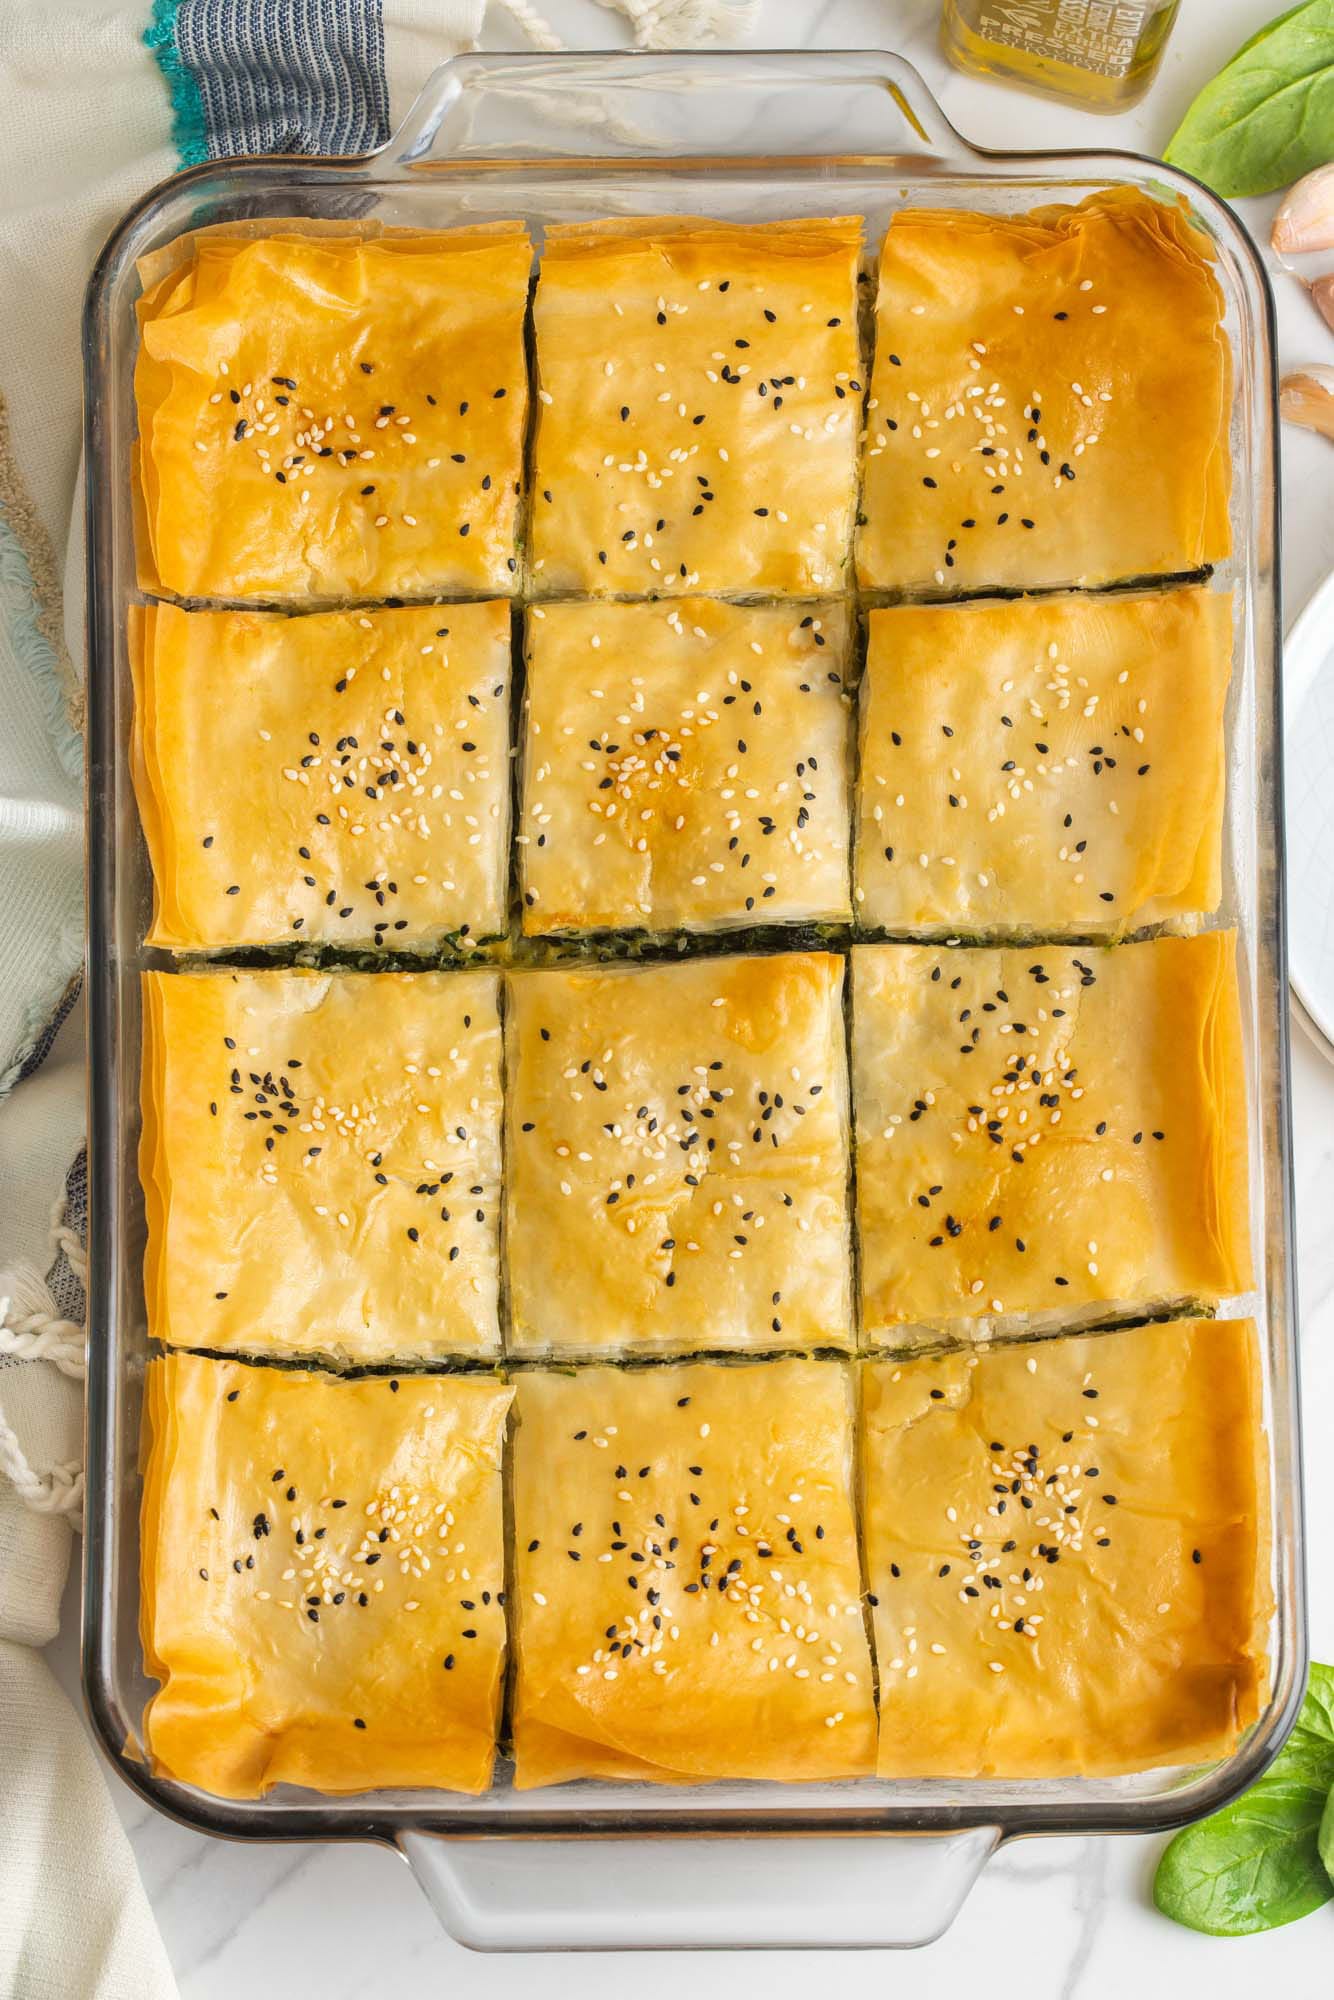 a 9x13 glass pan holding greek spinach pie, sliced into squares, golden brown.